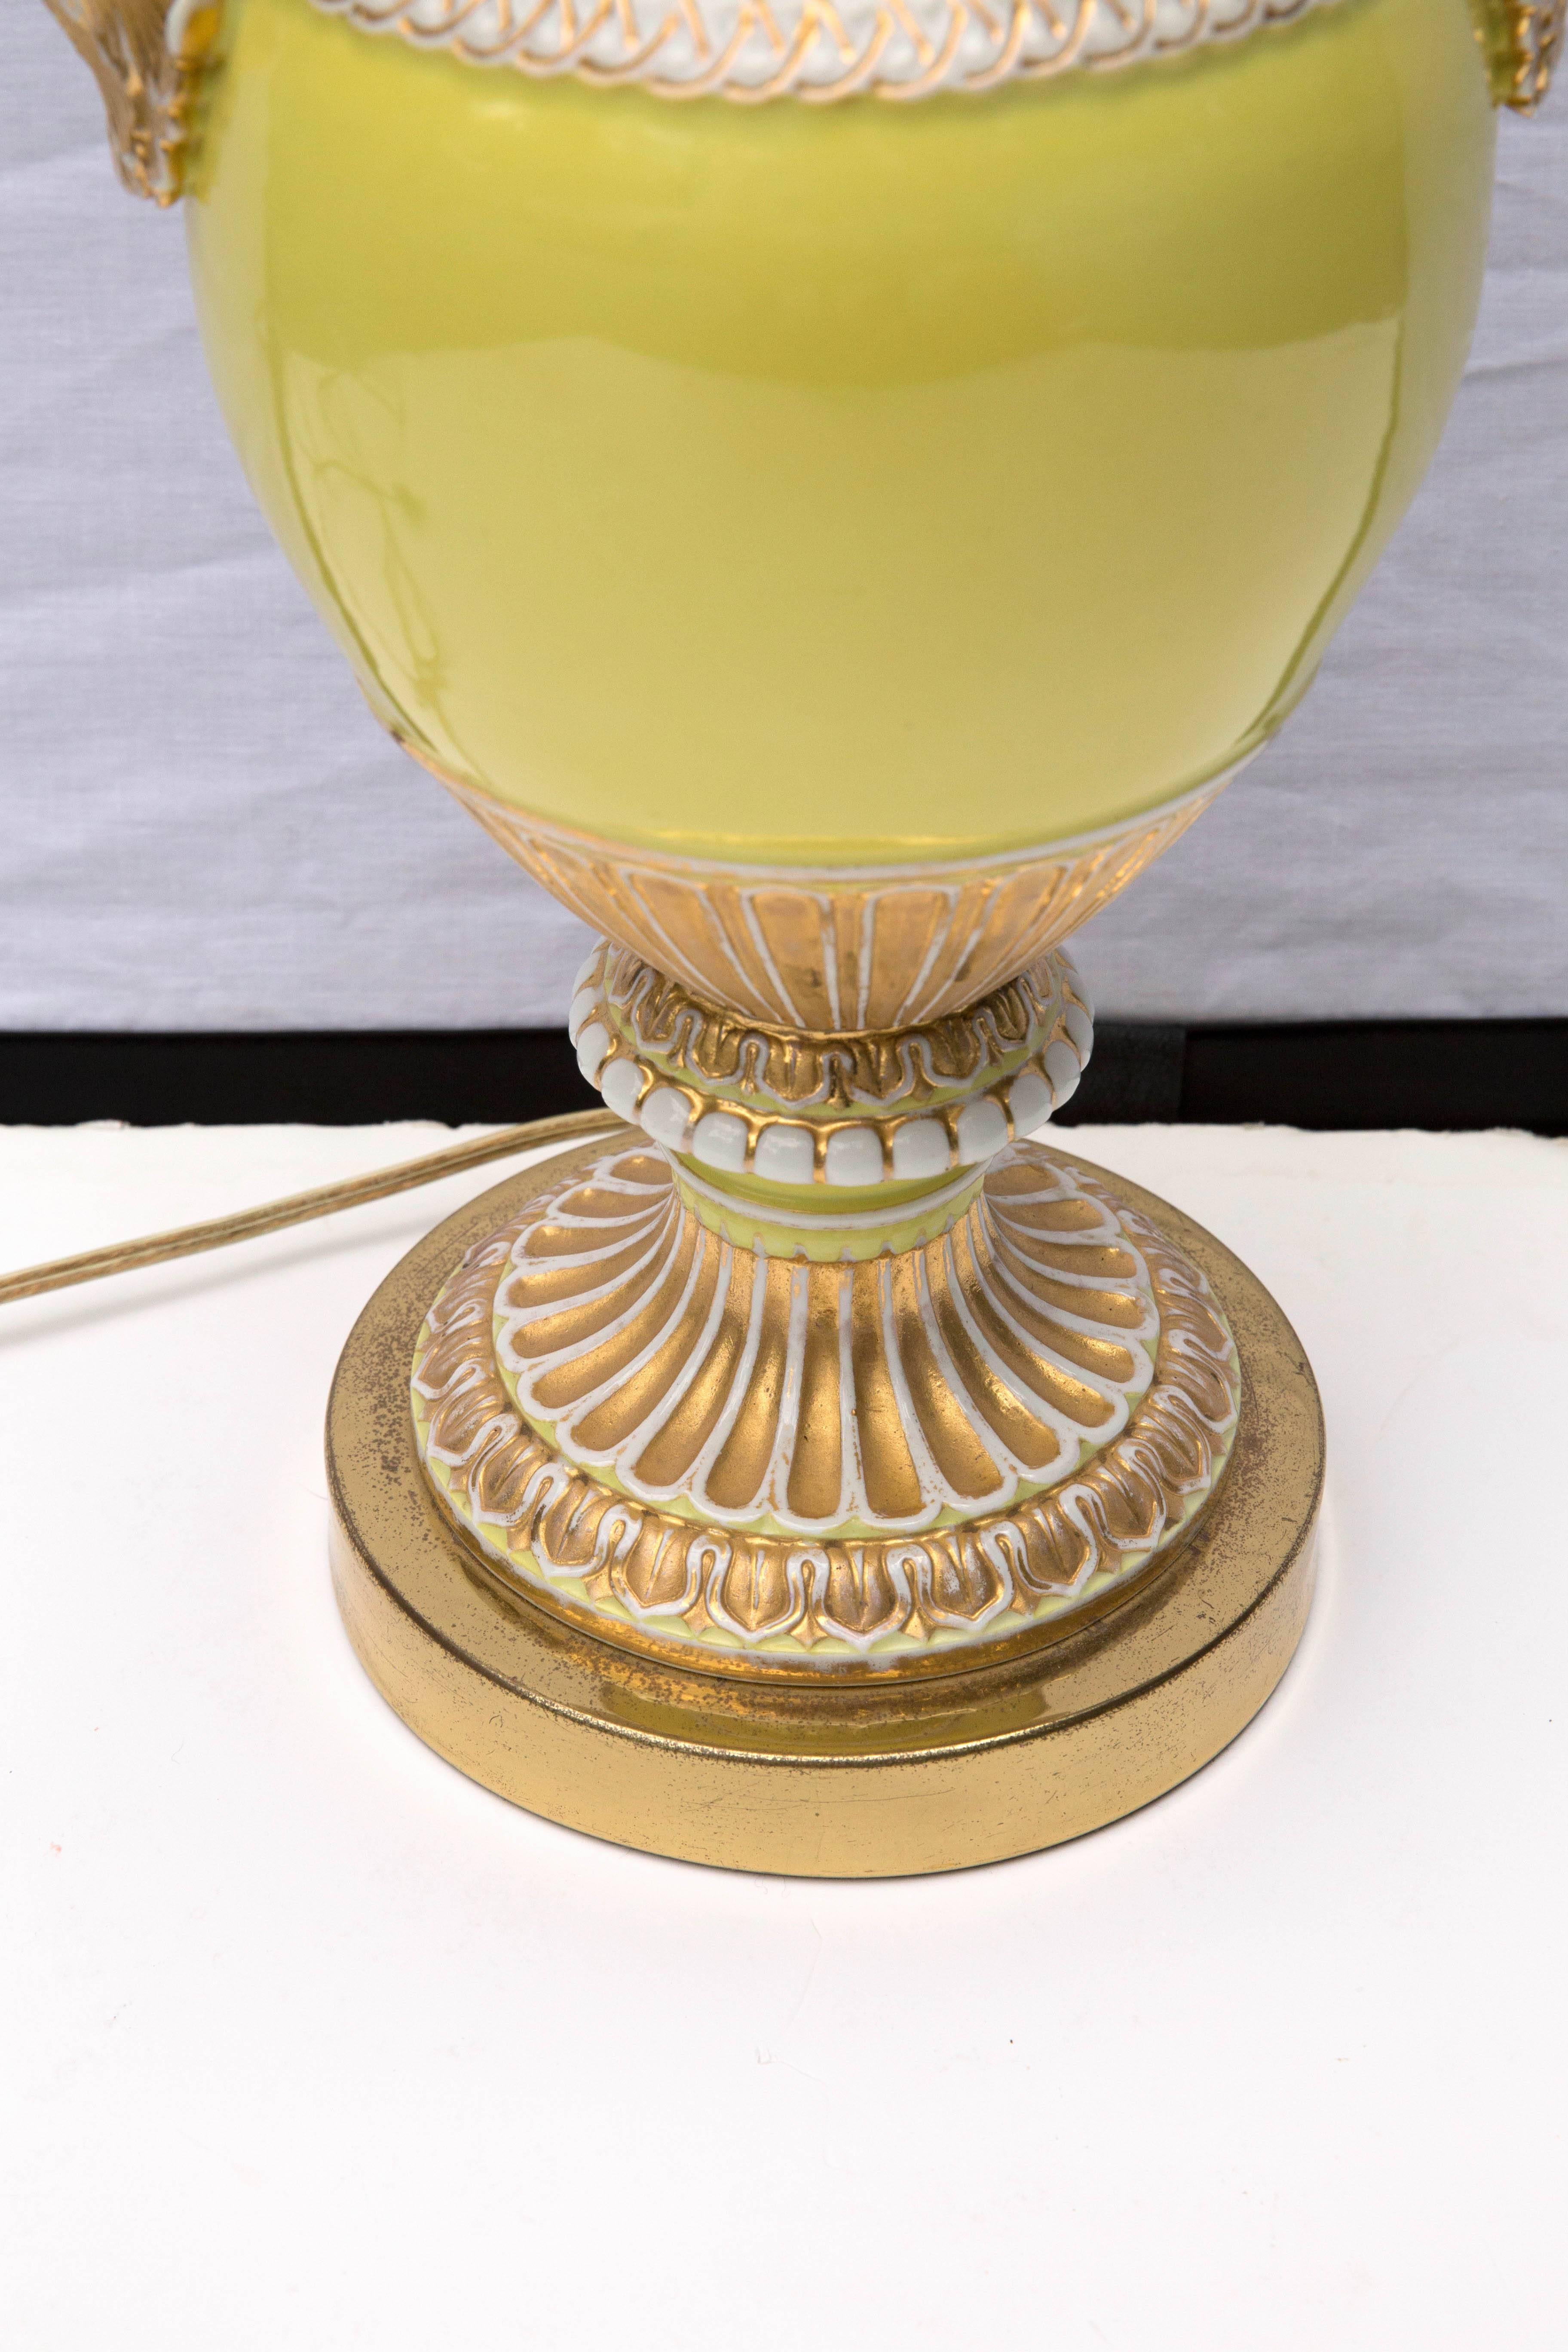 This 19th century vase have a beautiful yellow color with gilt gold highlights and curled white snakes as handles. To become a table lamp the vase has been capped and set on a base.